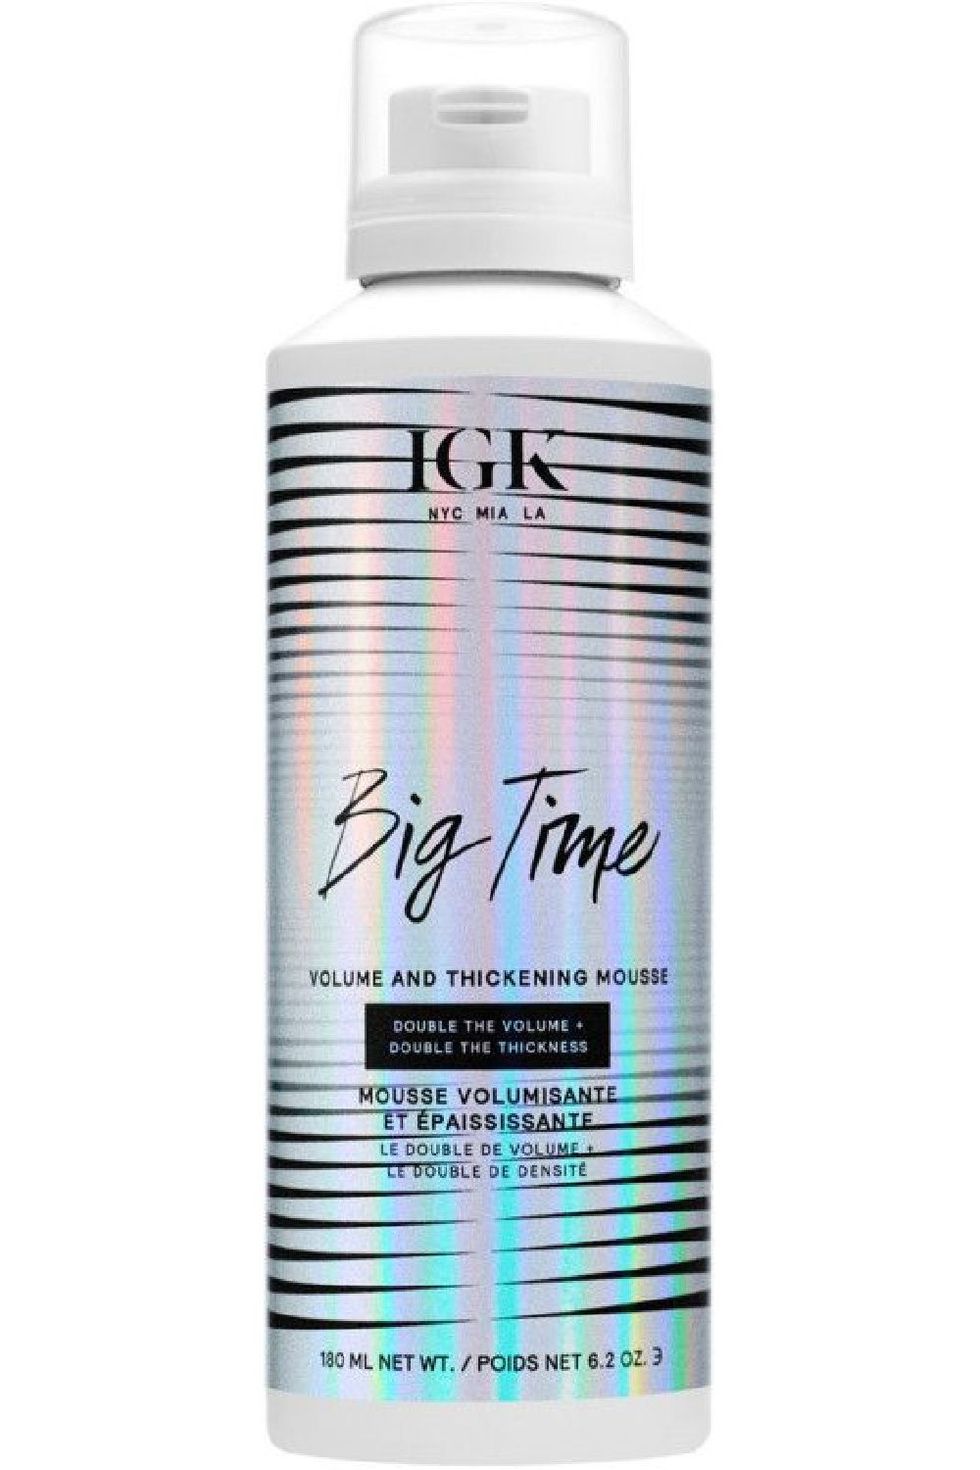 IGK Big Time Volume and Thickening Mousse